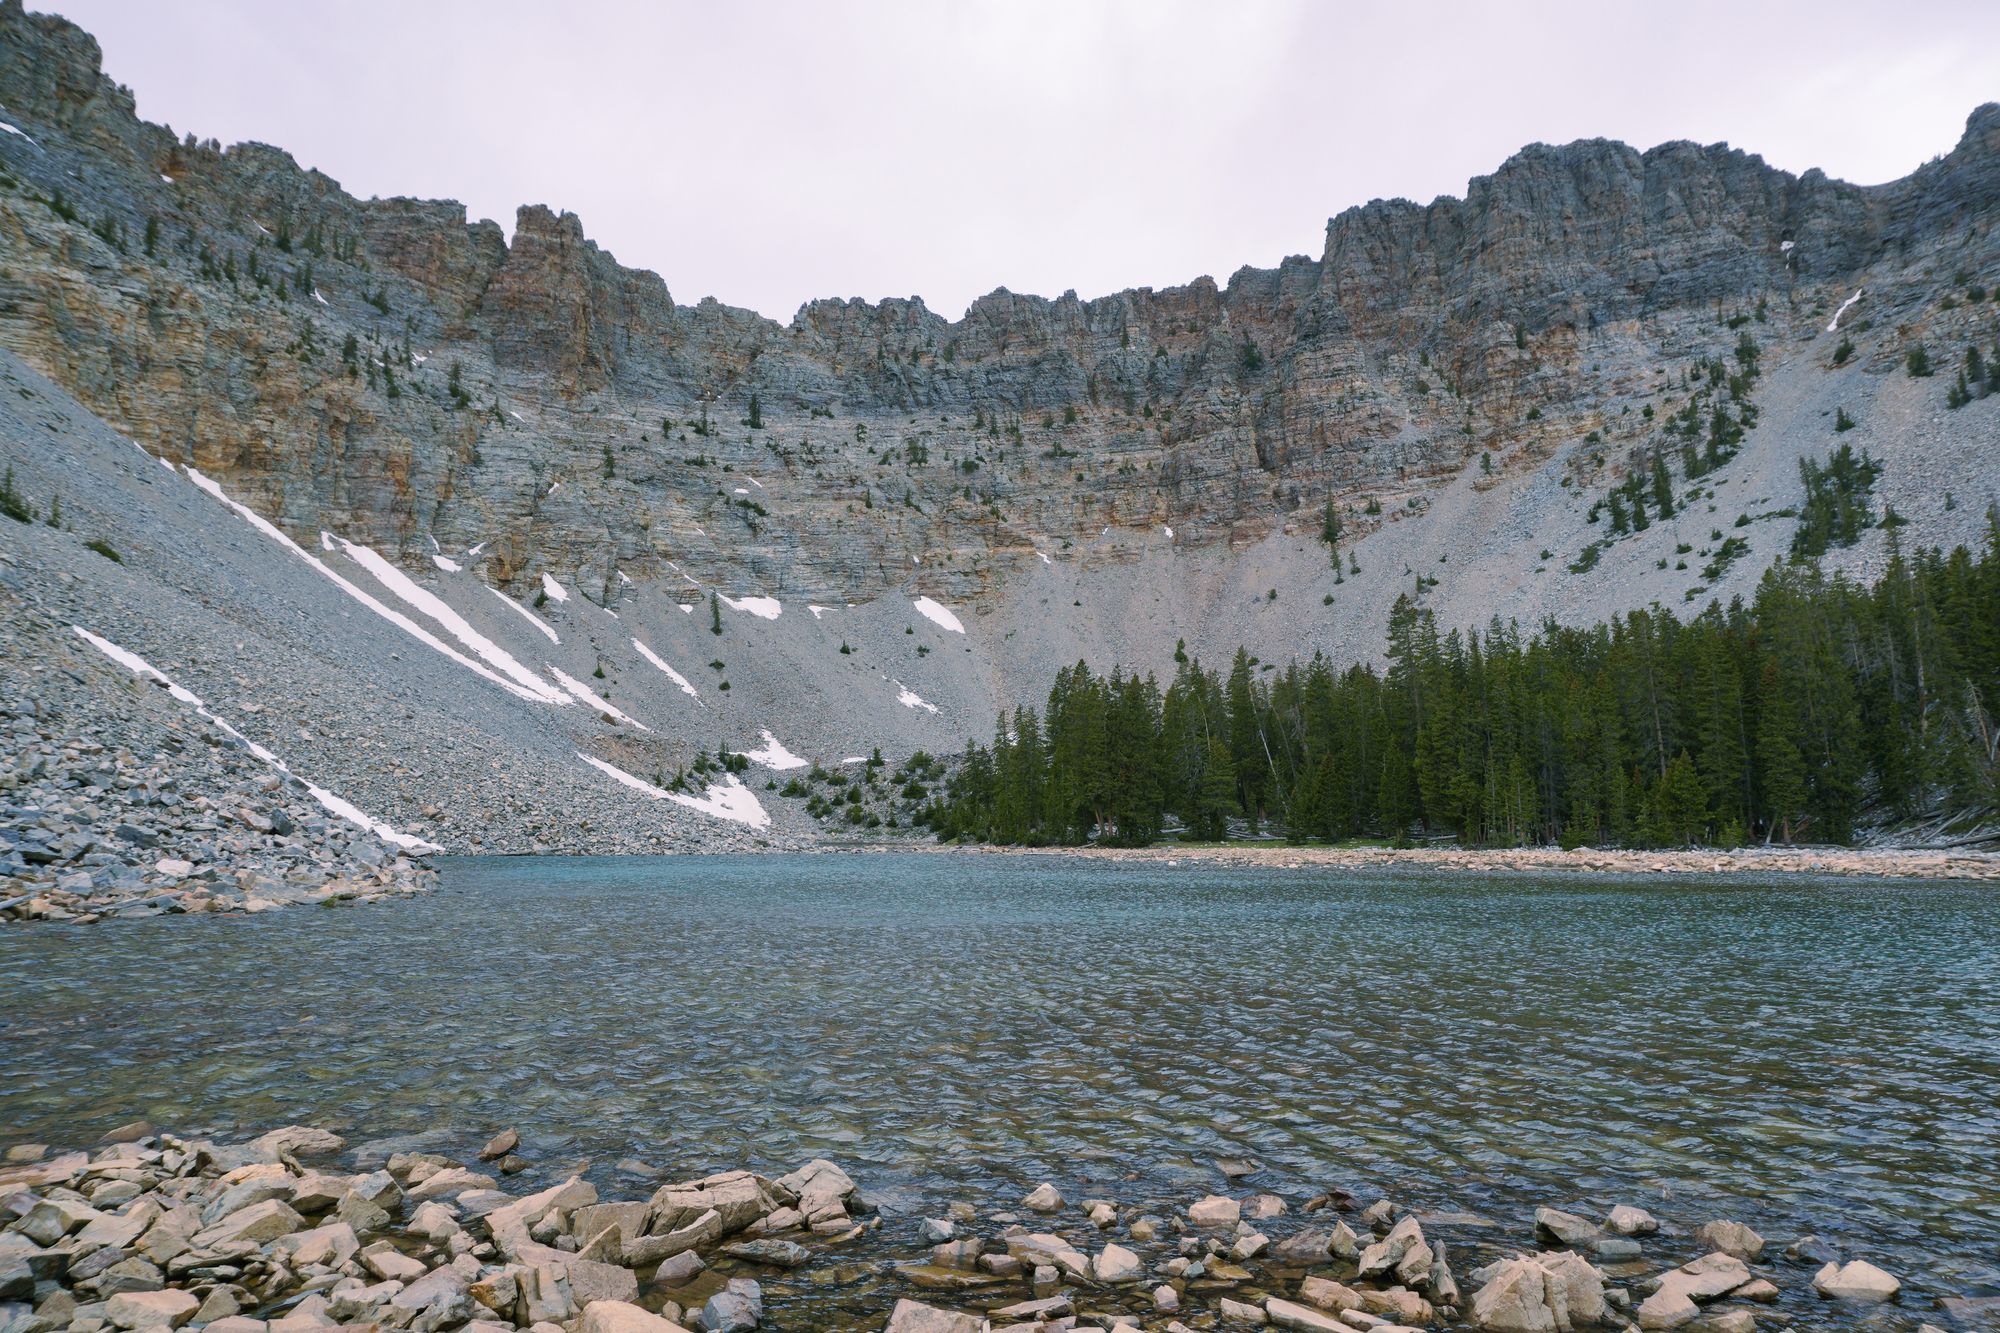 Backpacking in Great Basin National Park